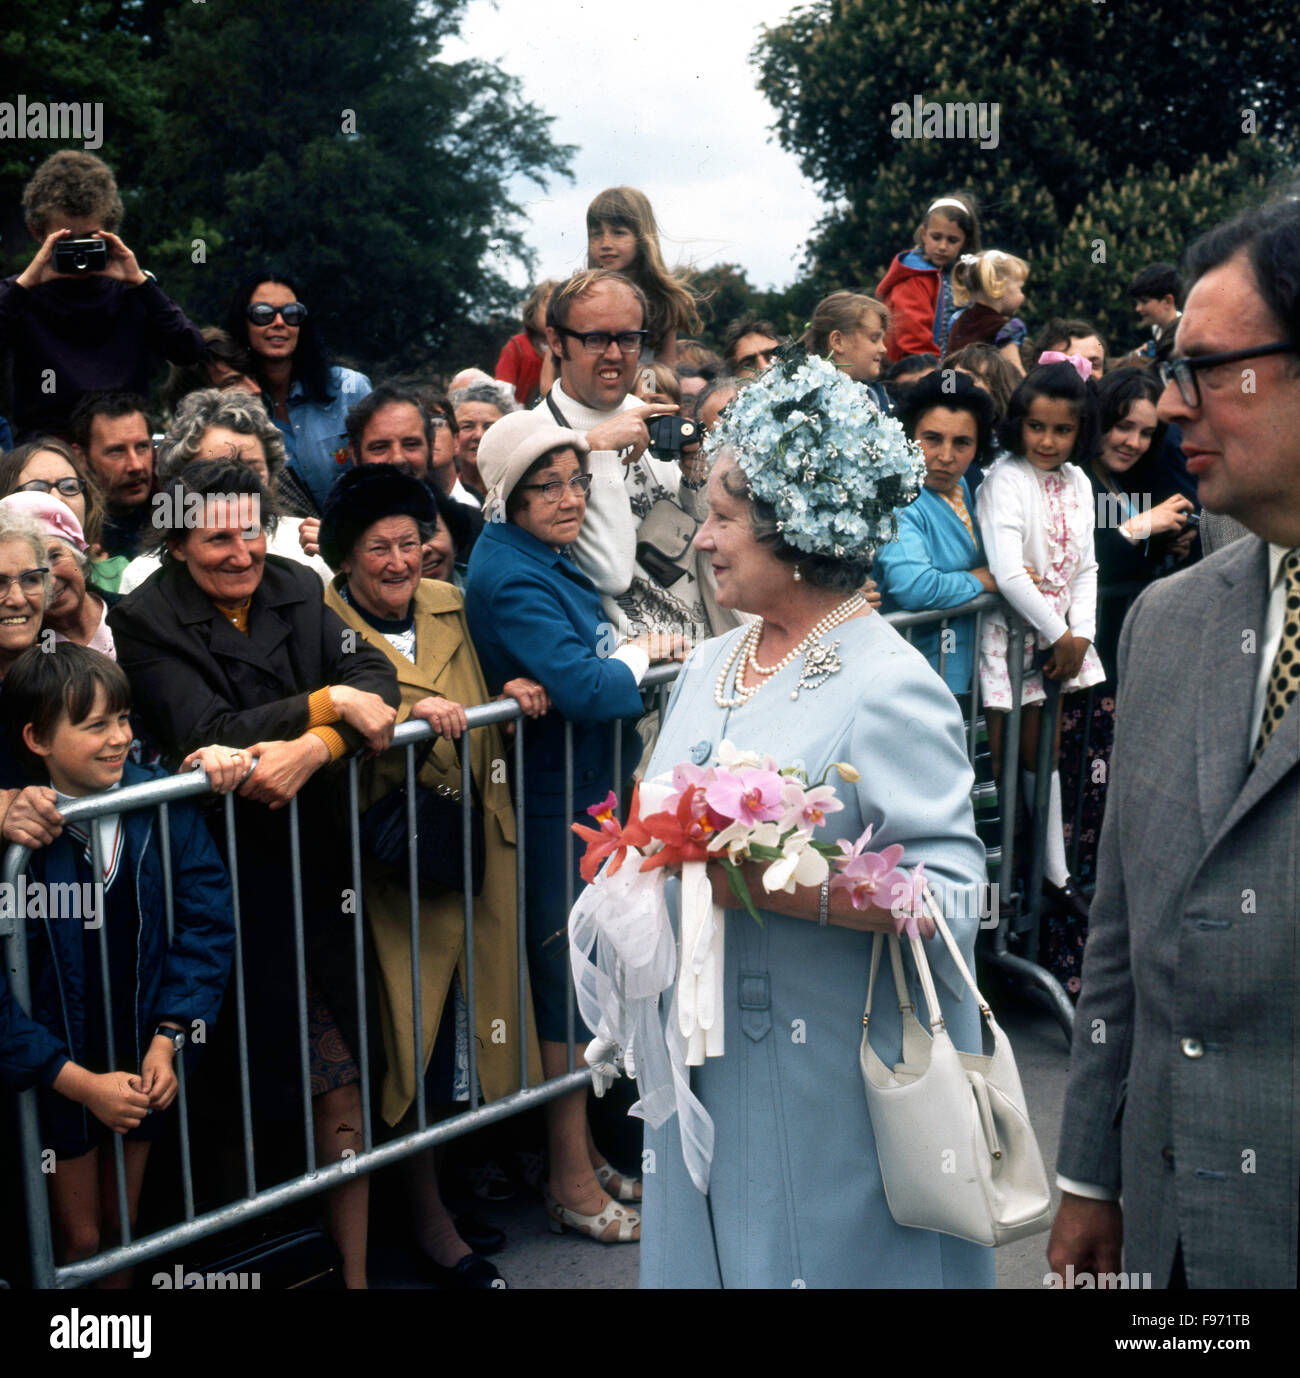 HM Queen Elizabeth the Queen Mother talking to local people on her royal visit to Stratford-upon-Avon on June 1st 1974. Stock Photo